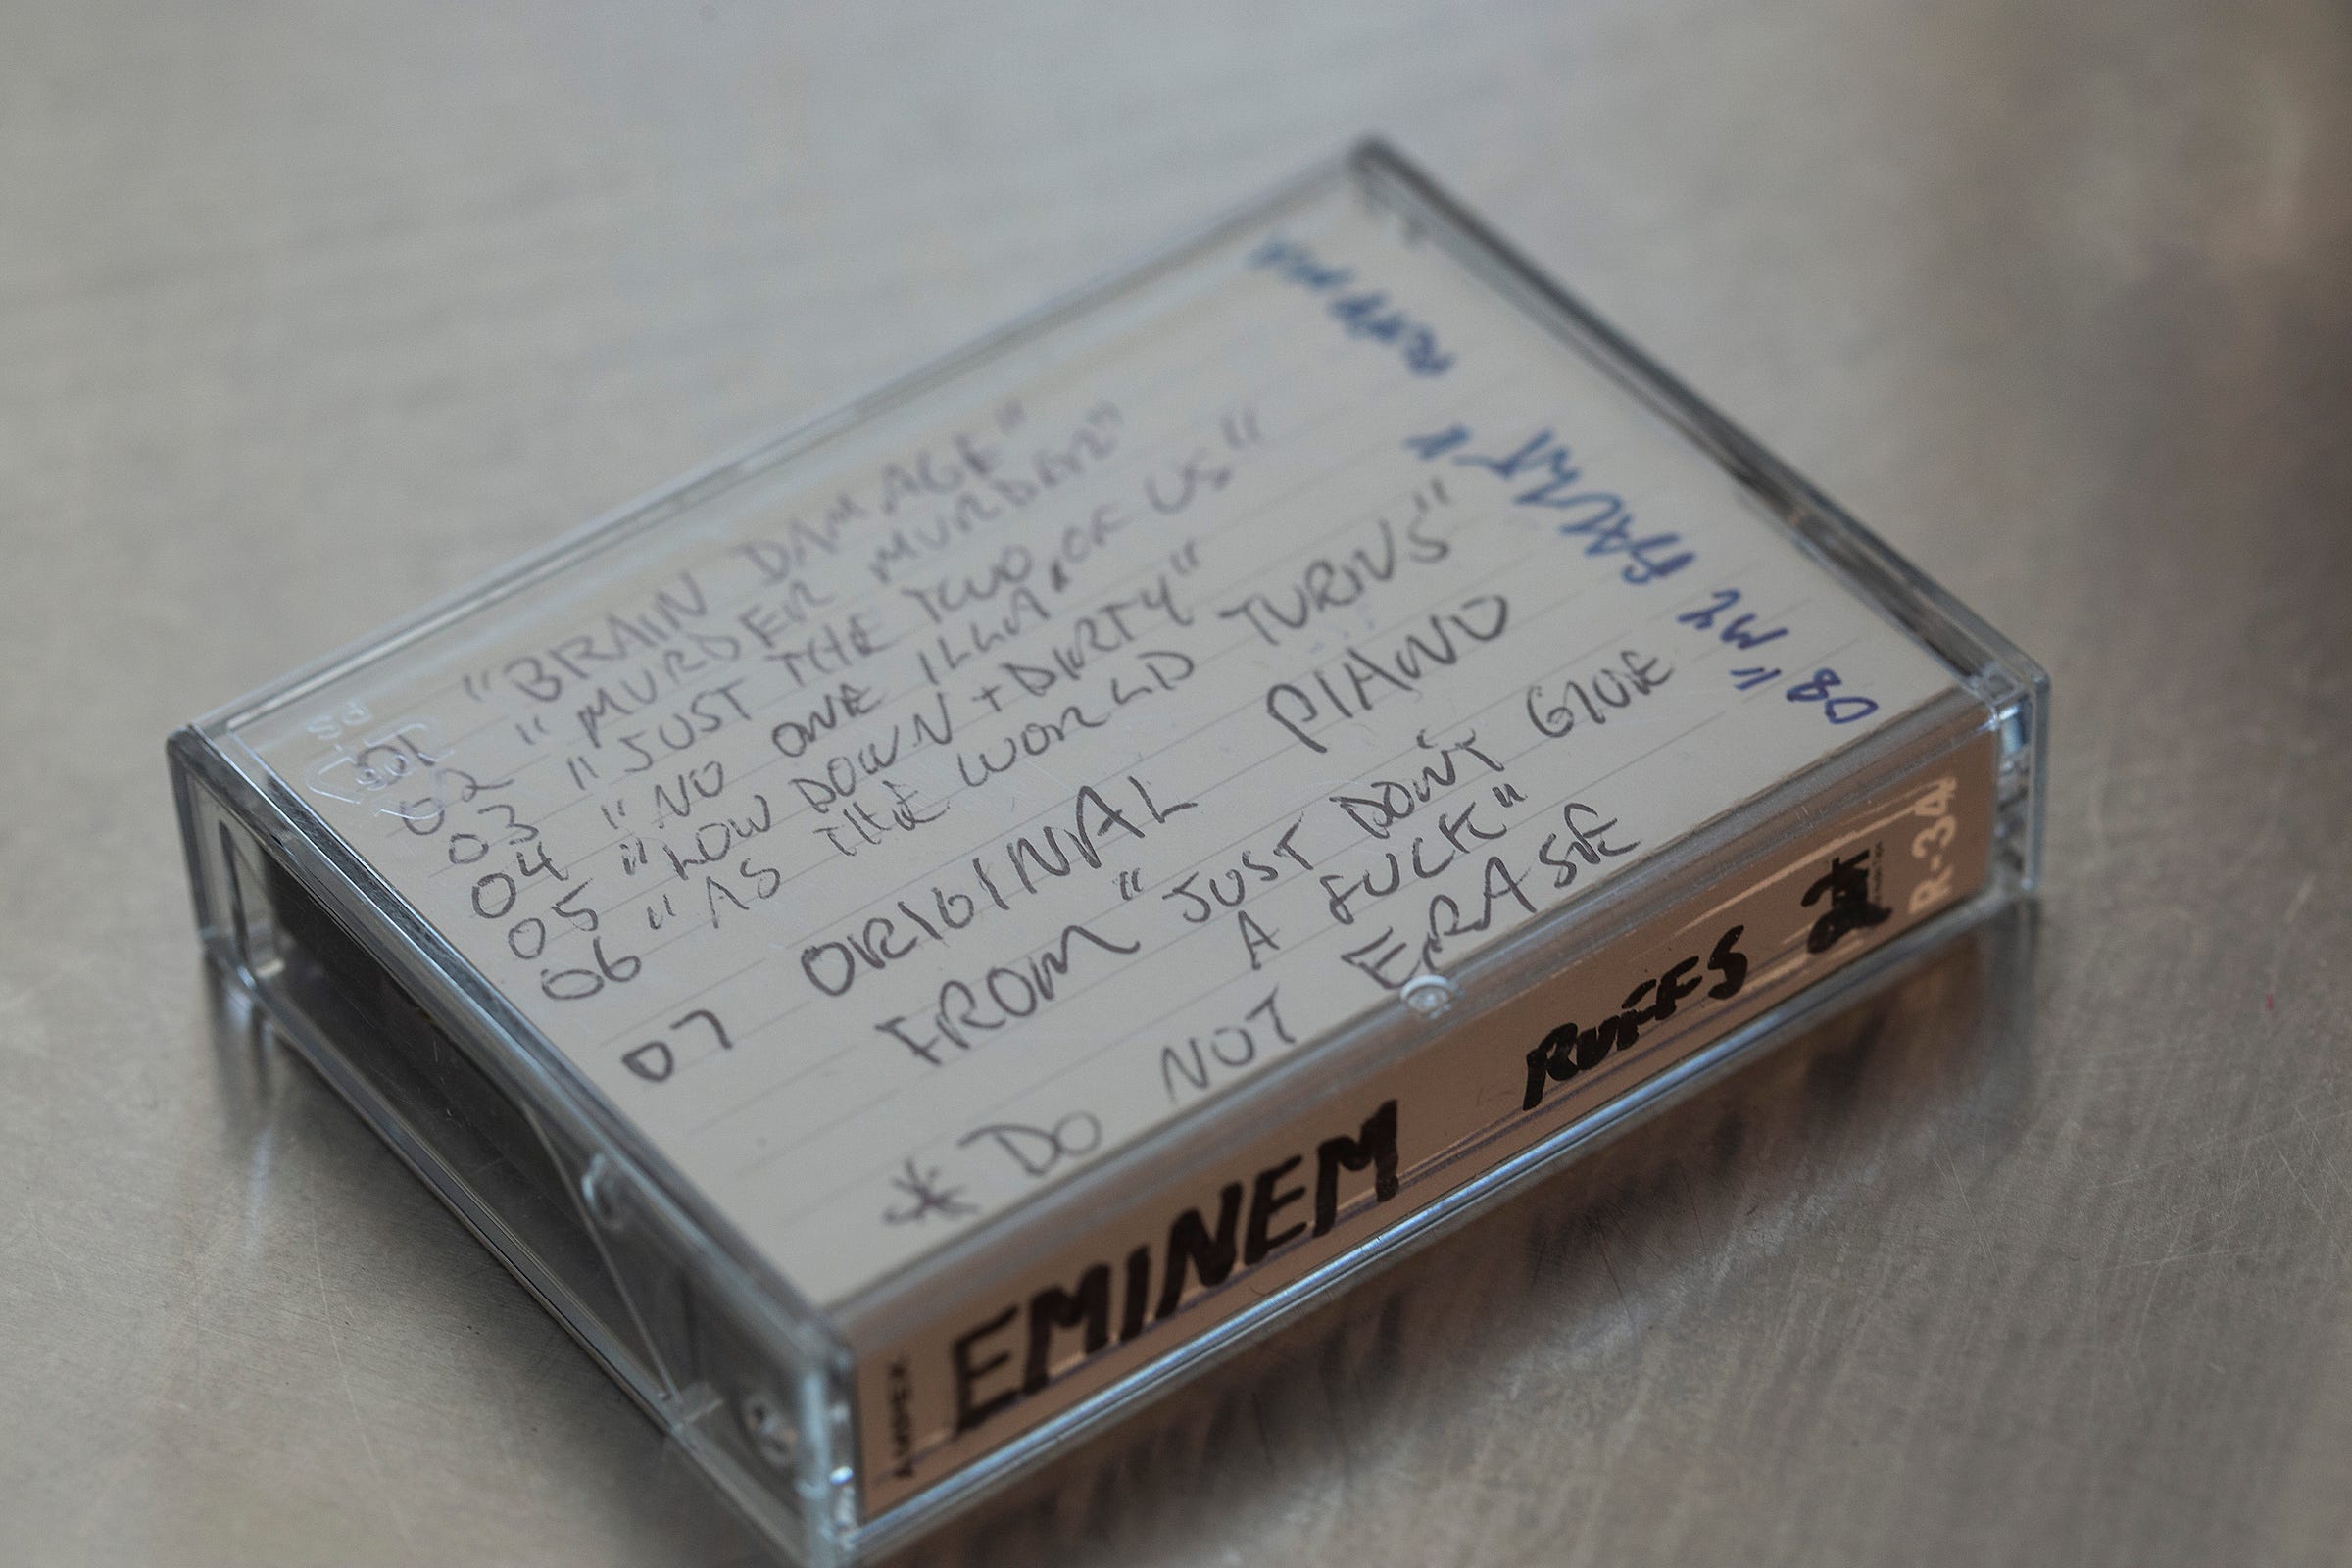 A digital audio tape from "The Slim Shady LP" recording sessions.